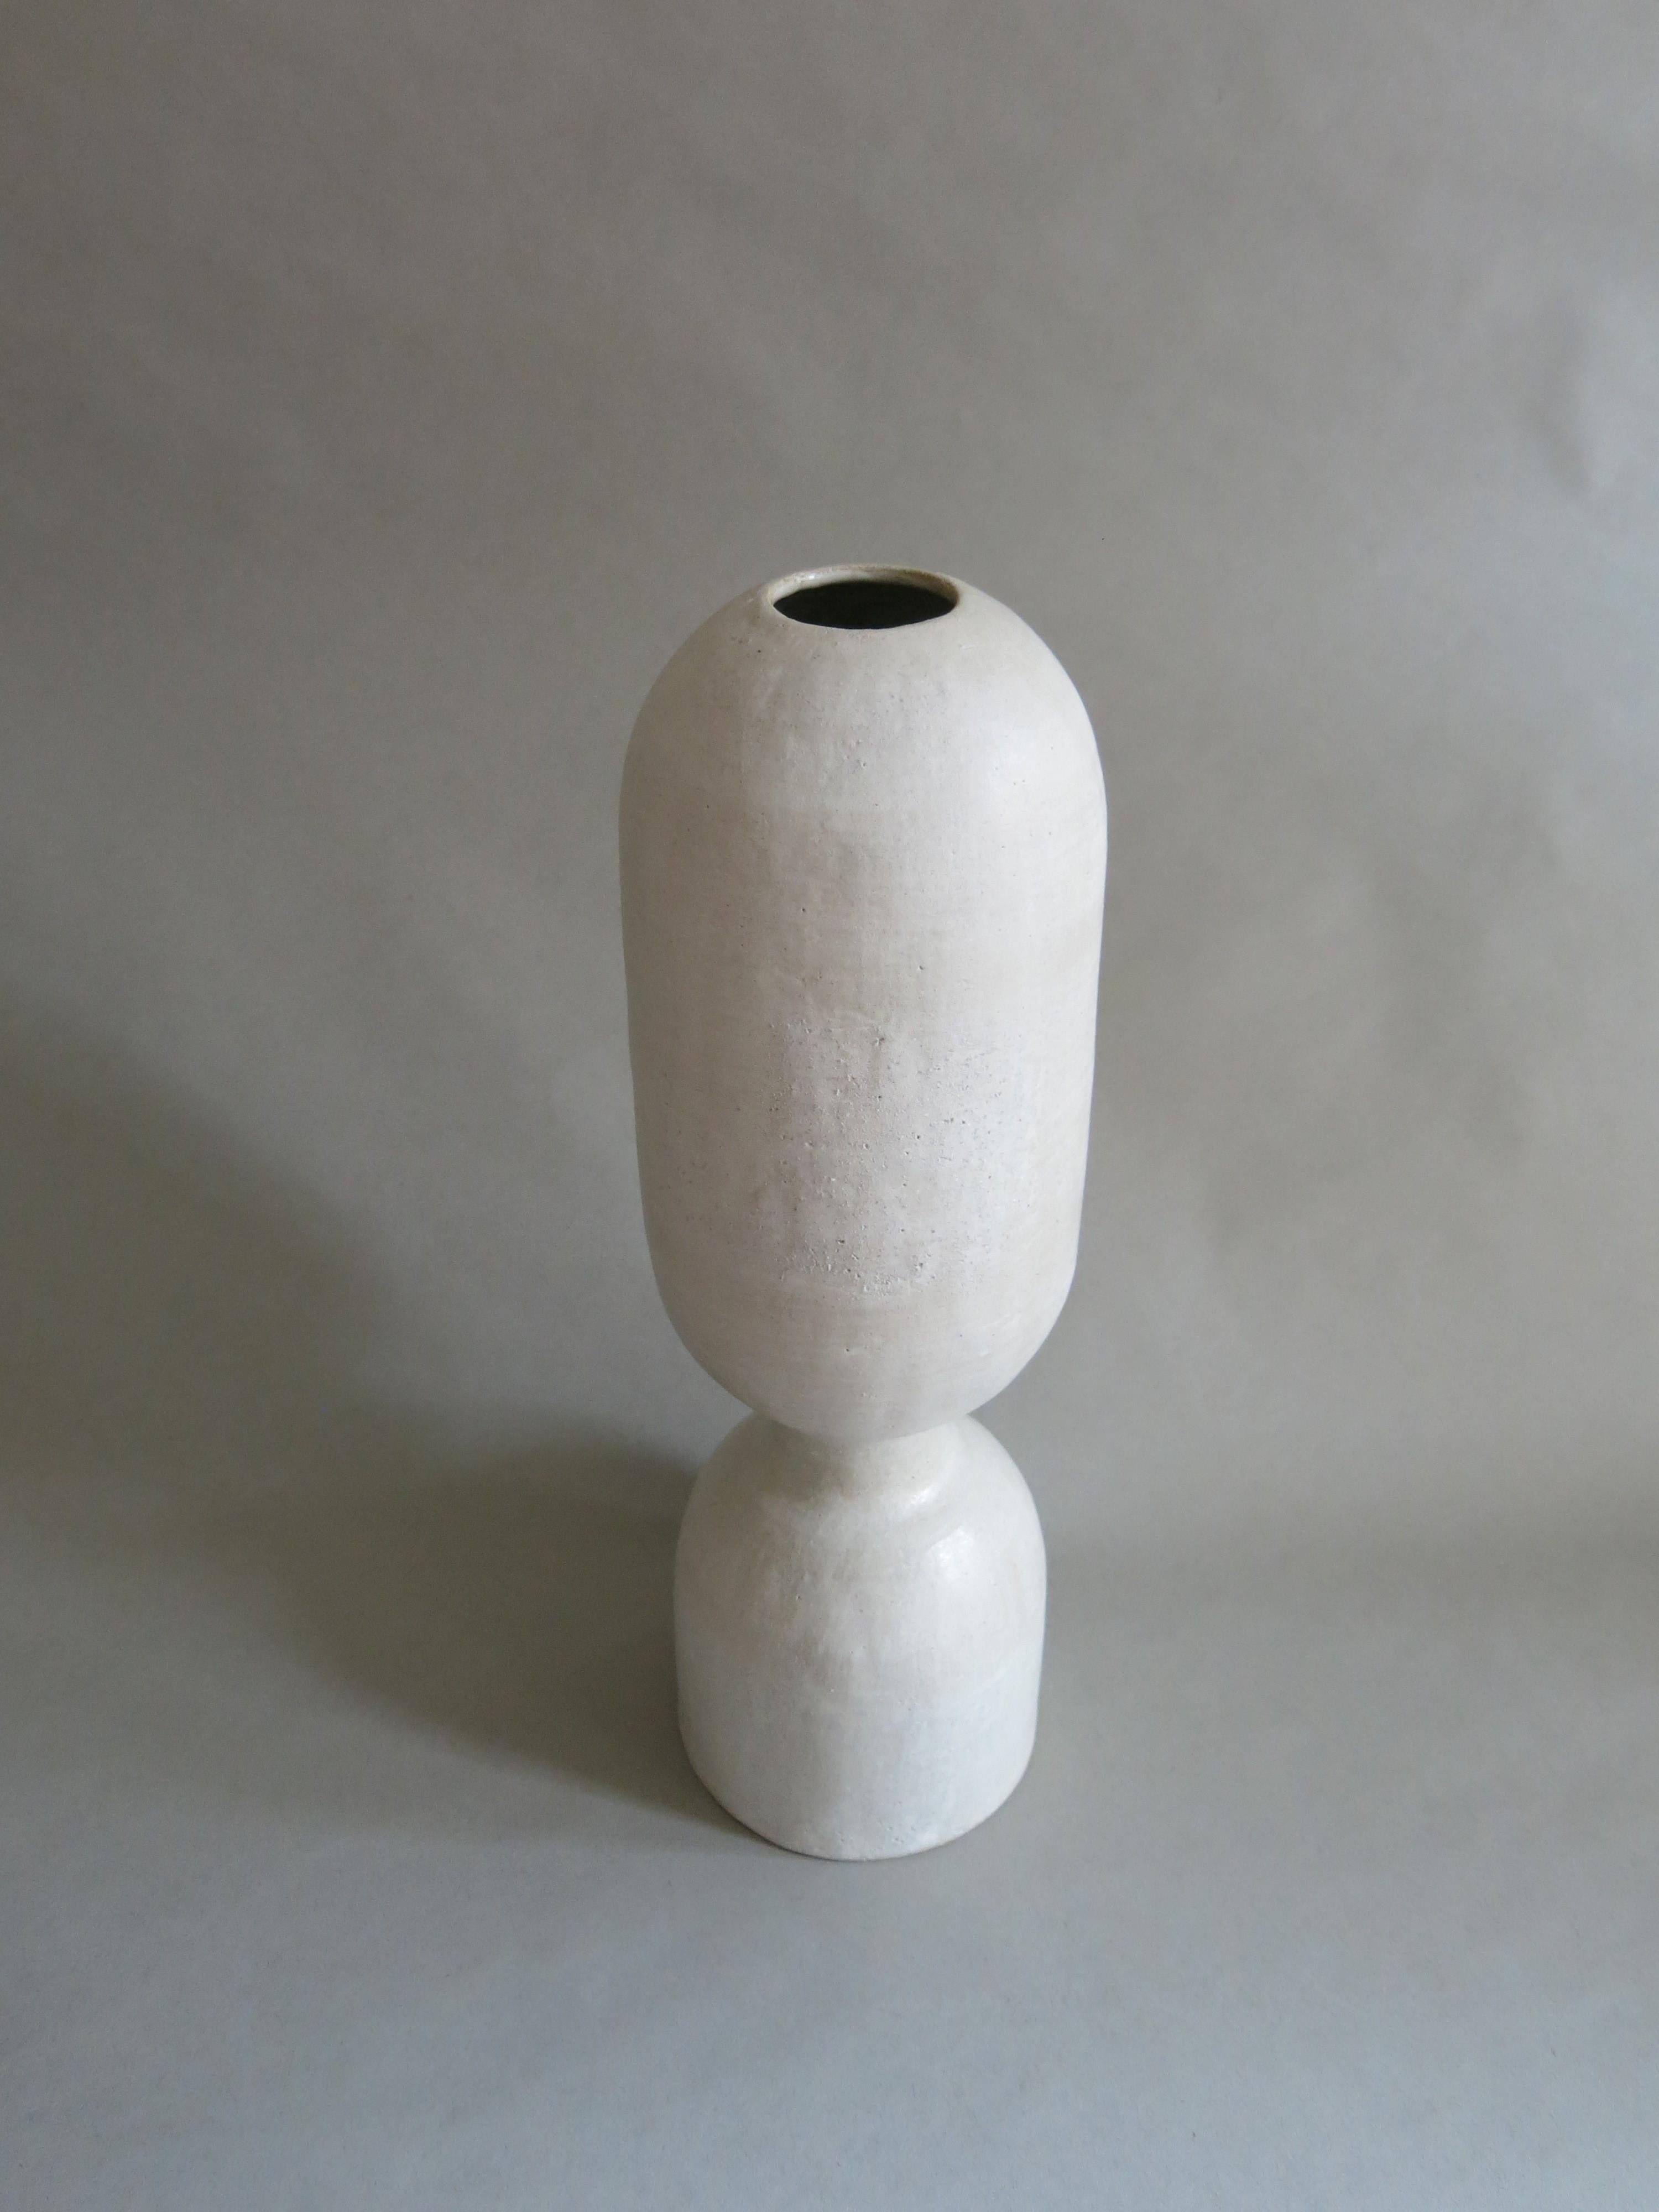 This exquisite sculptural ceramic stoneware BBL-8 Vessel by Humble Matter is hand-built out of an off-white textured stoneware with a smooth semi-matte glaze, which reflects a subtle hue that changes with the light. The piece measures 
16.5